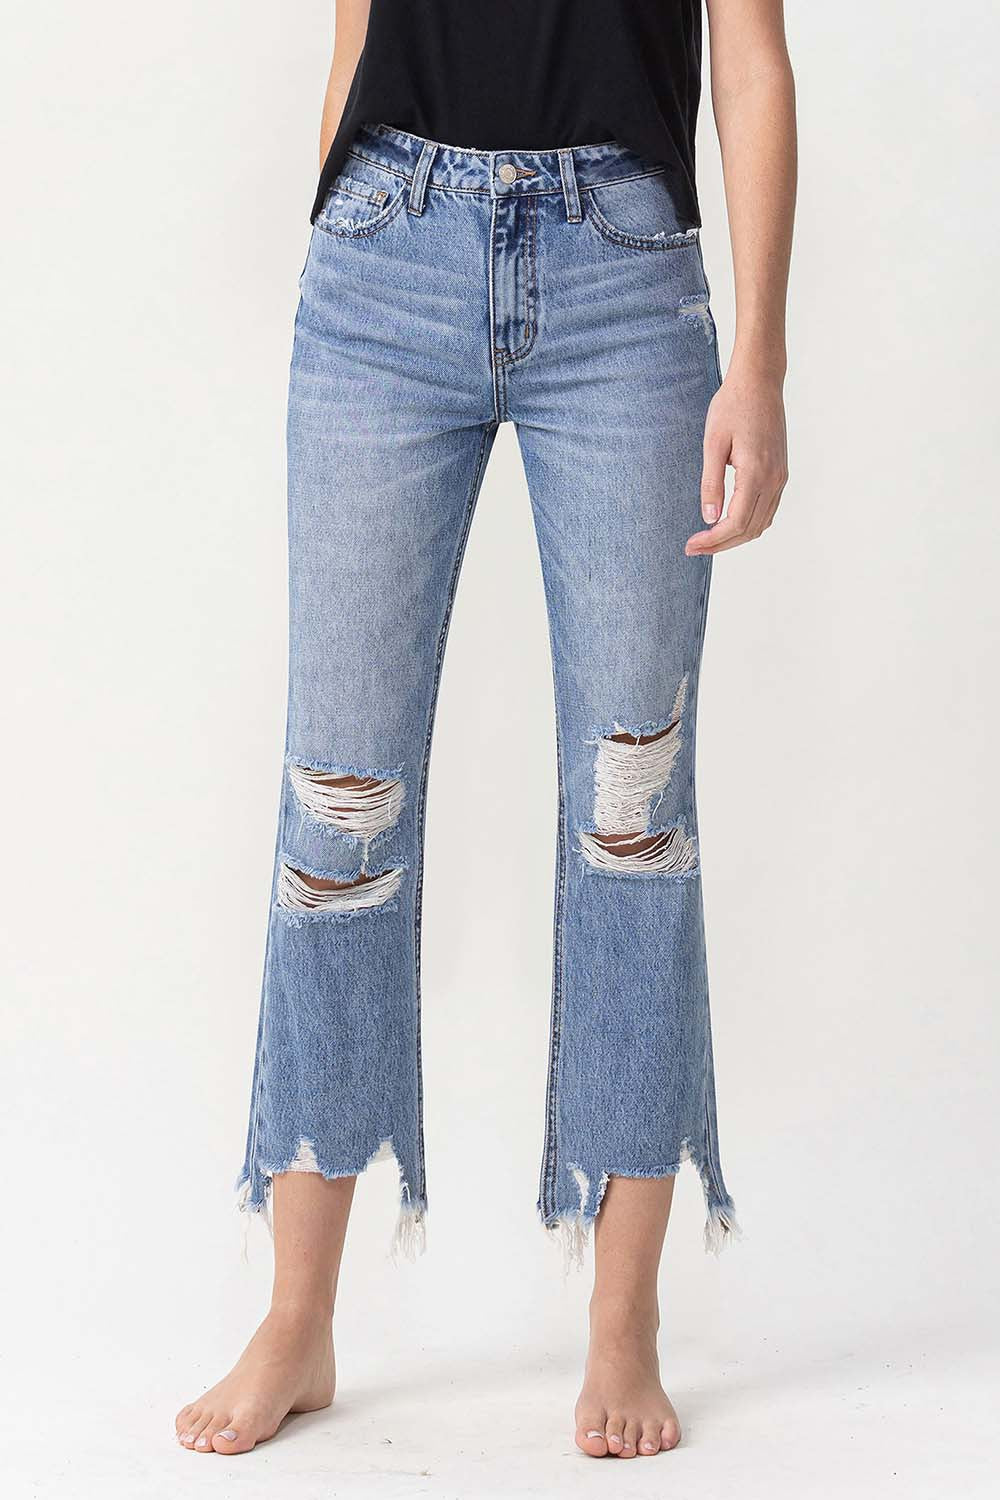 Lovervet High Rise Distressed Straight Jeans-Denim-Inspired by Justeen-Women's Clothing Boutique